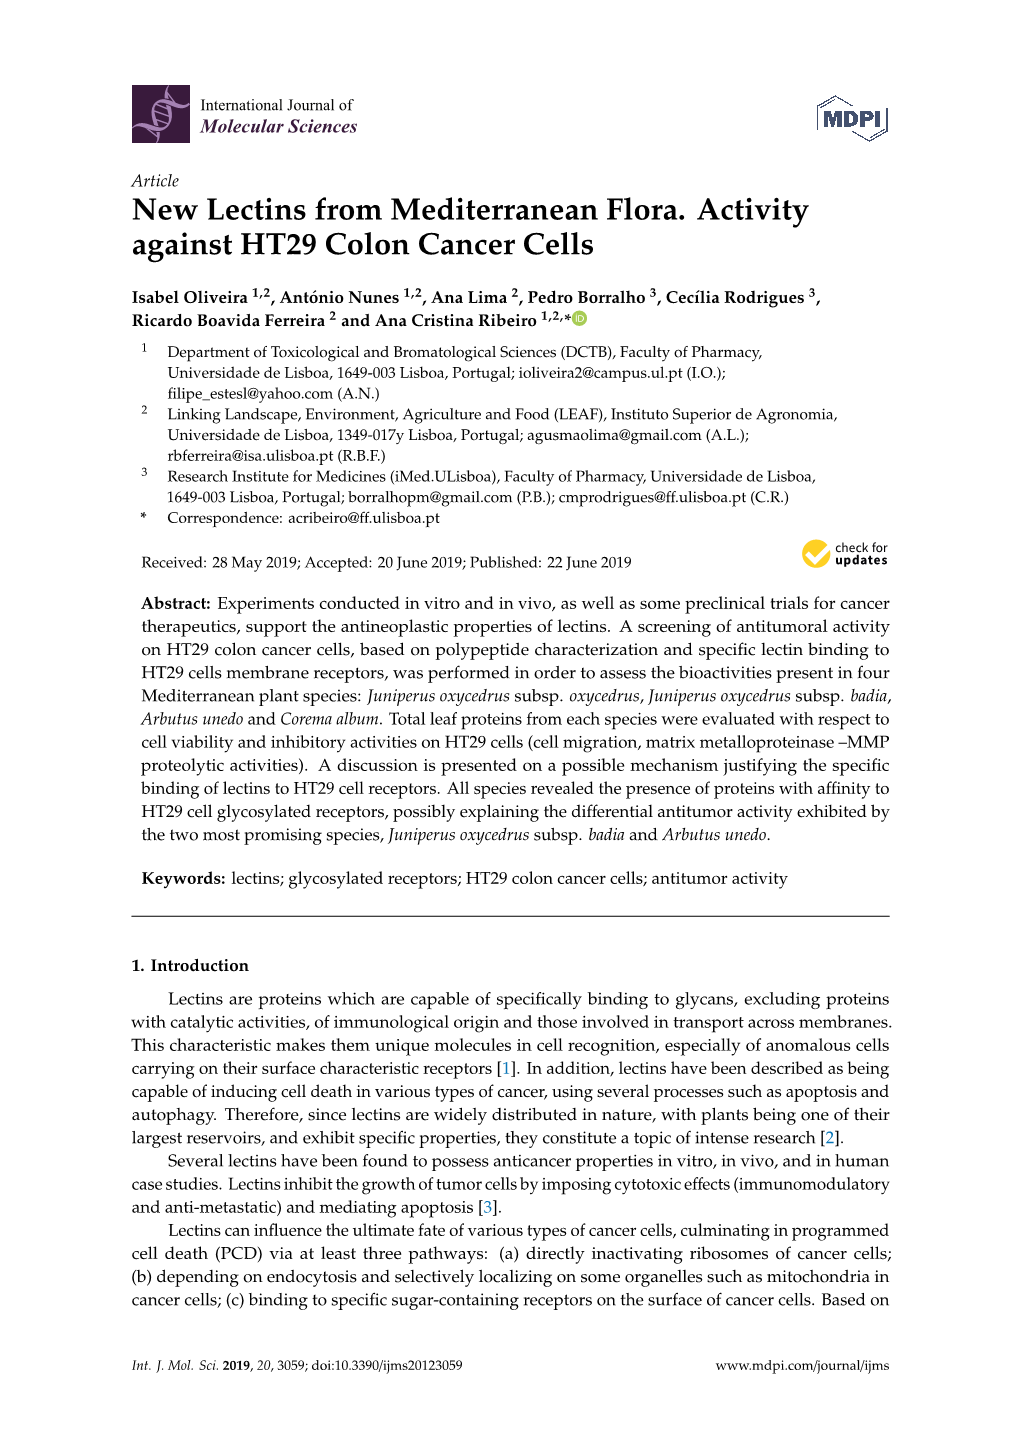 New Lectins from Mediterranean Flora. Activity Against HT29 Colon Cancer Cells